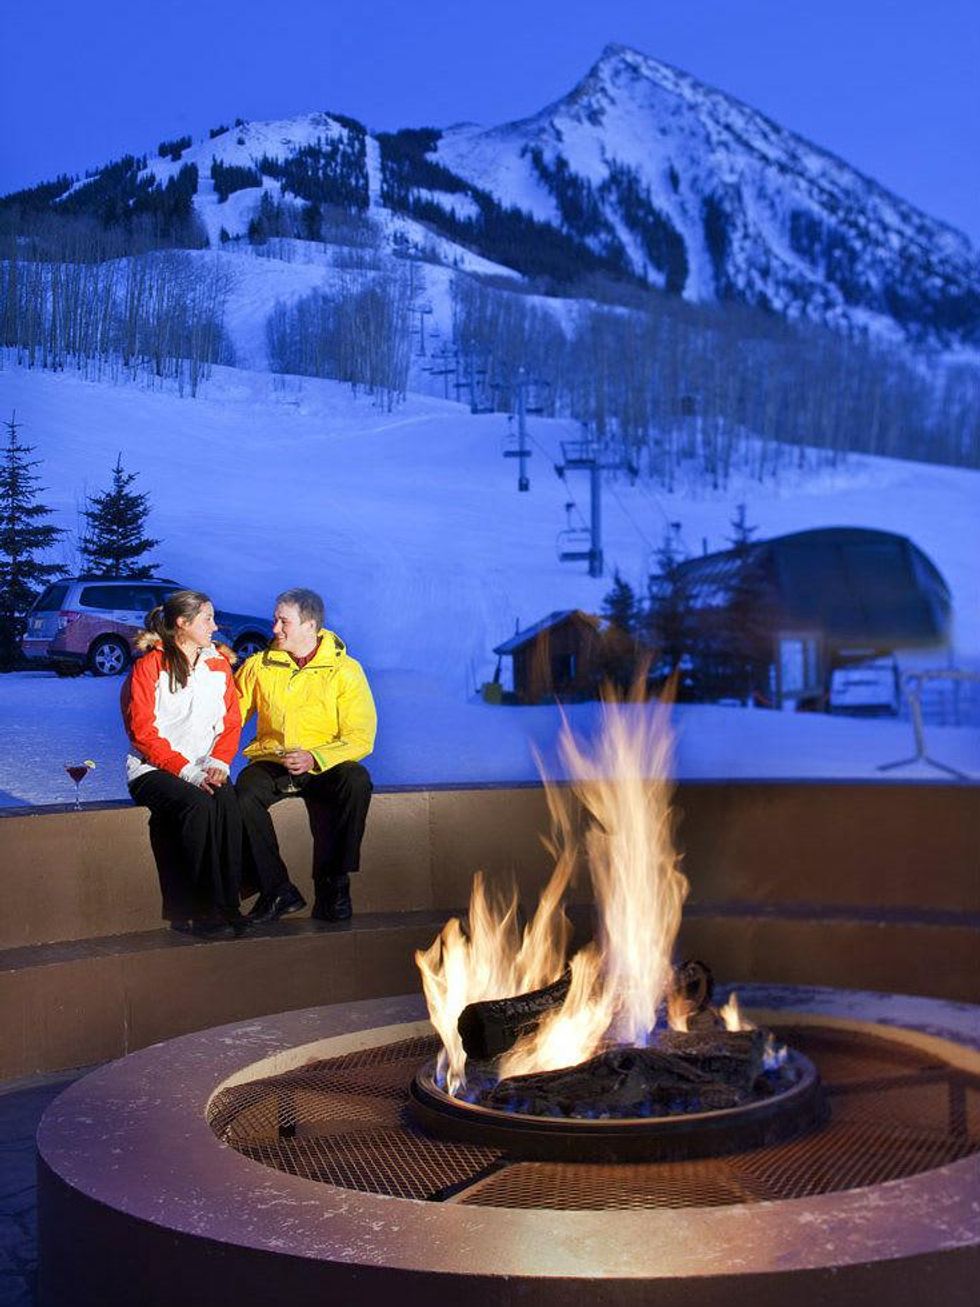 Elevation Hotel & Spa in Crested Butte